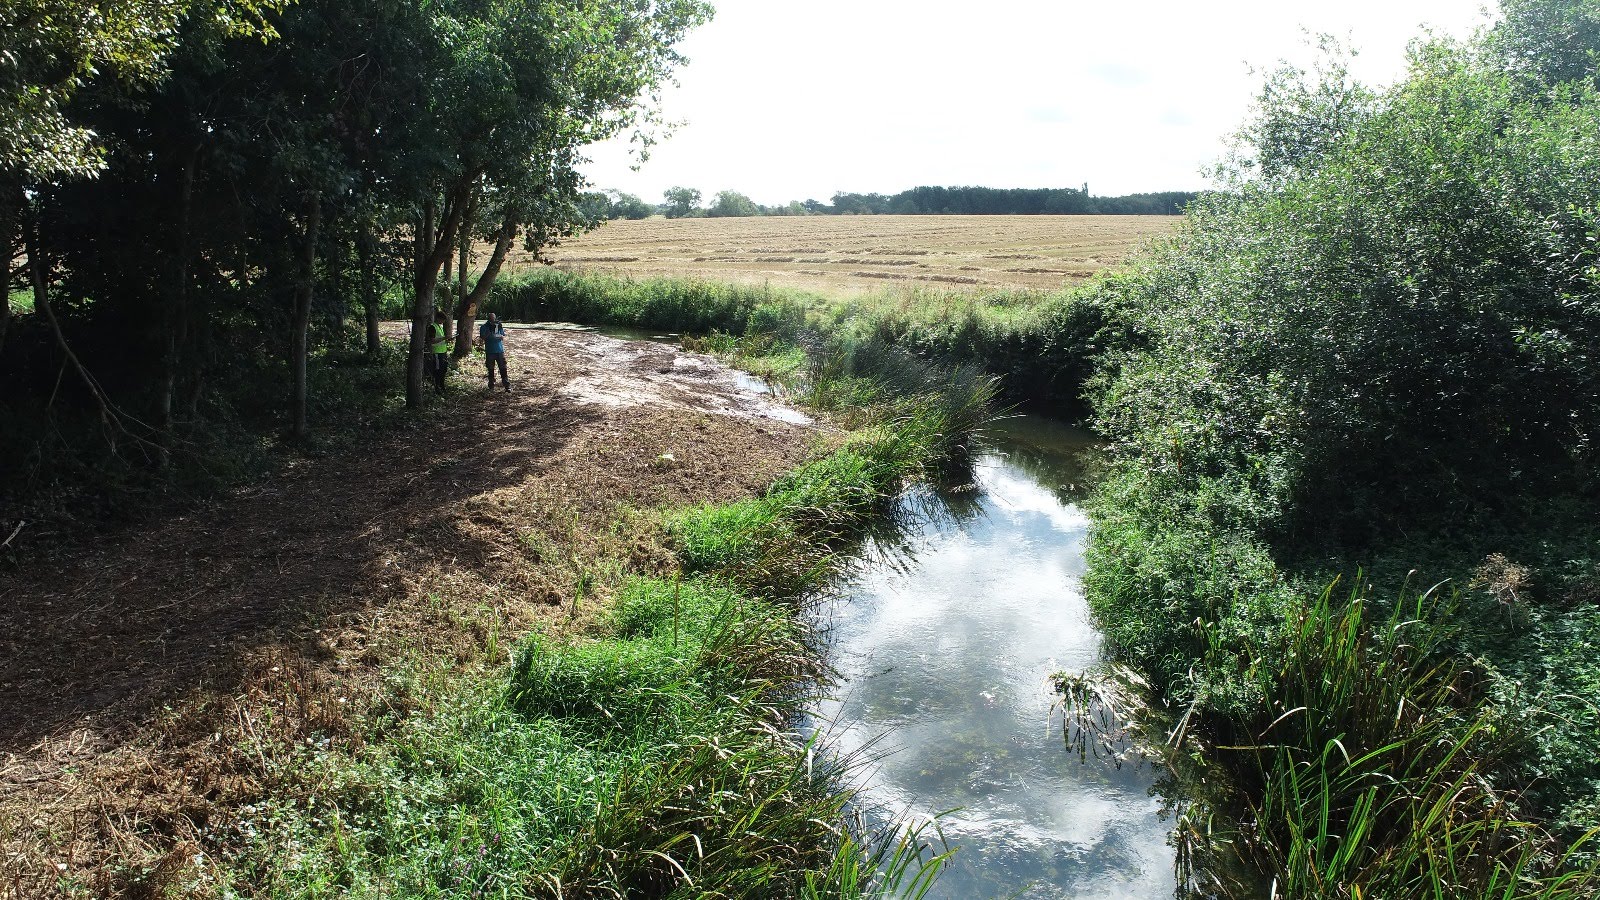 The River Mease